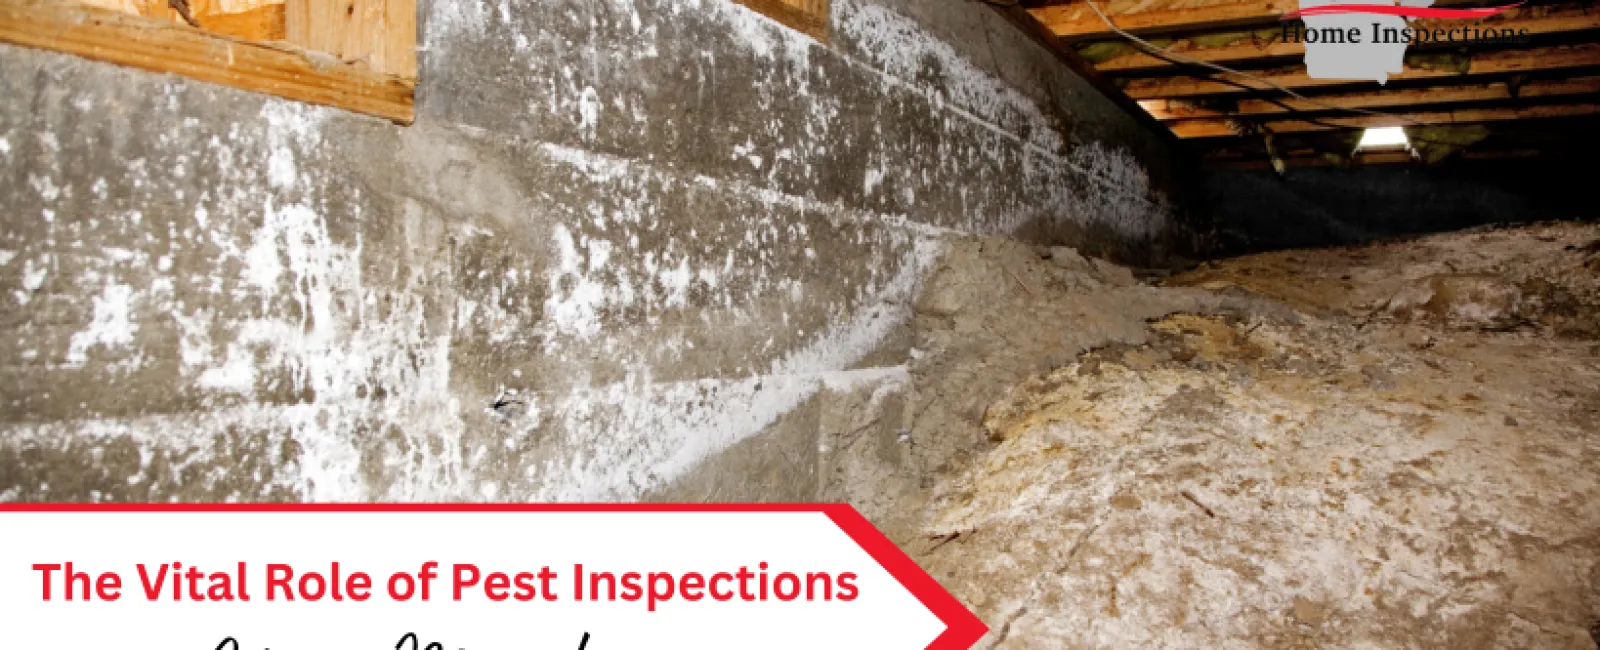 The Vital Role of Pest Inspections in Home Maintenance